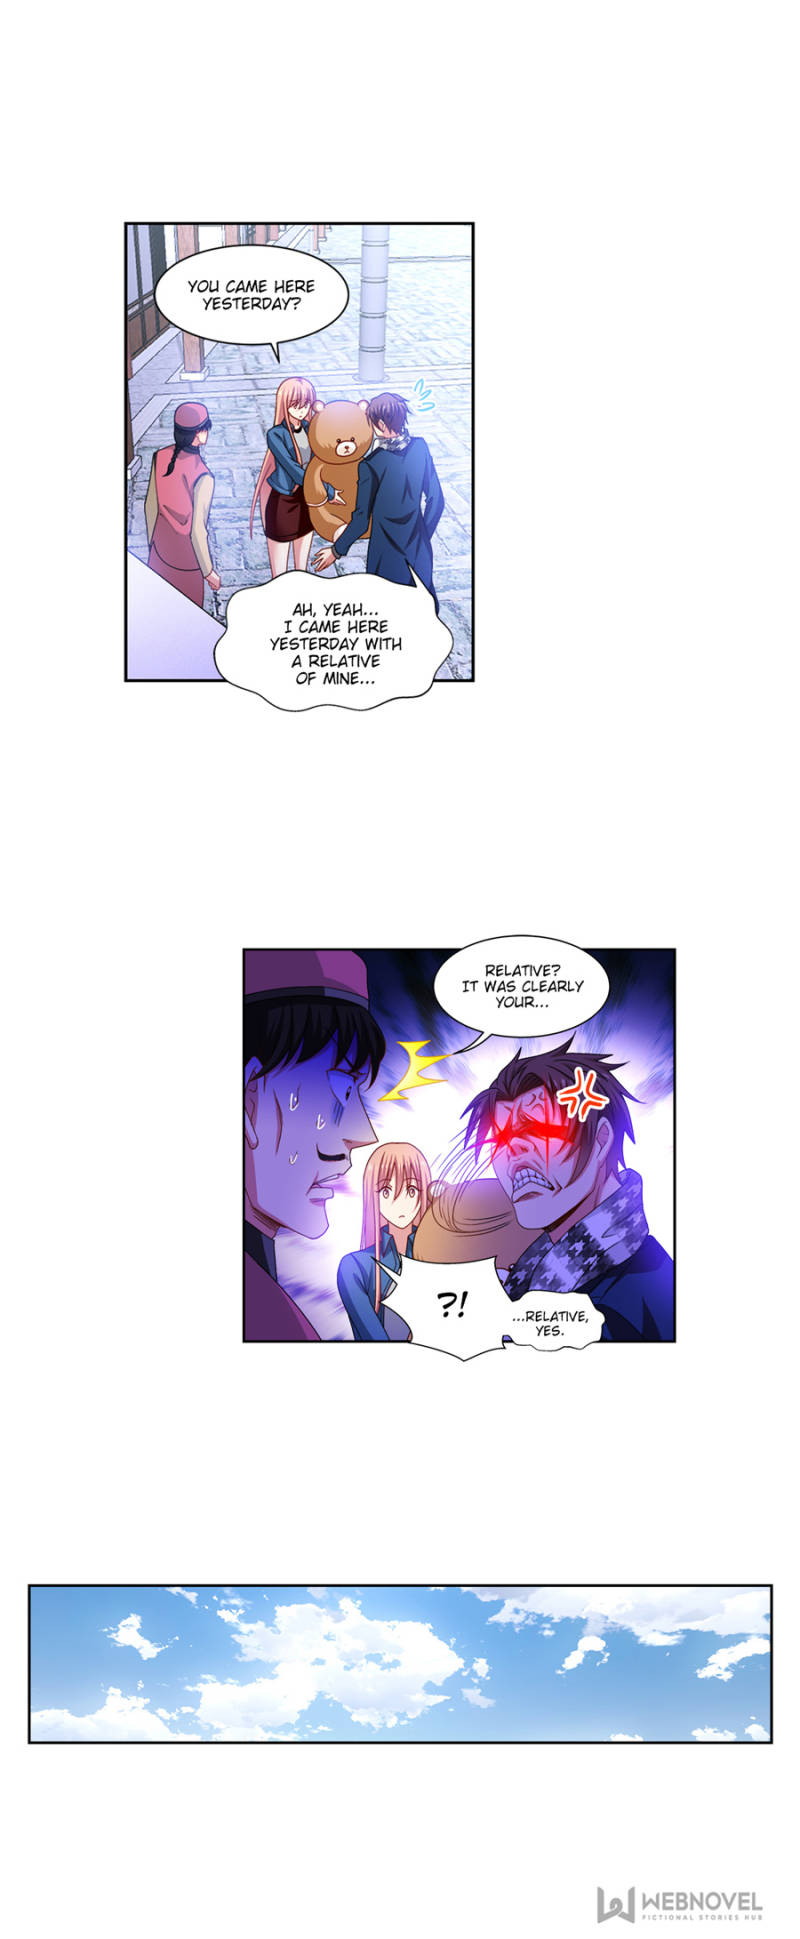 So Pure, So Flirtatious ( Very Pure ) - Page 1